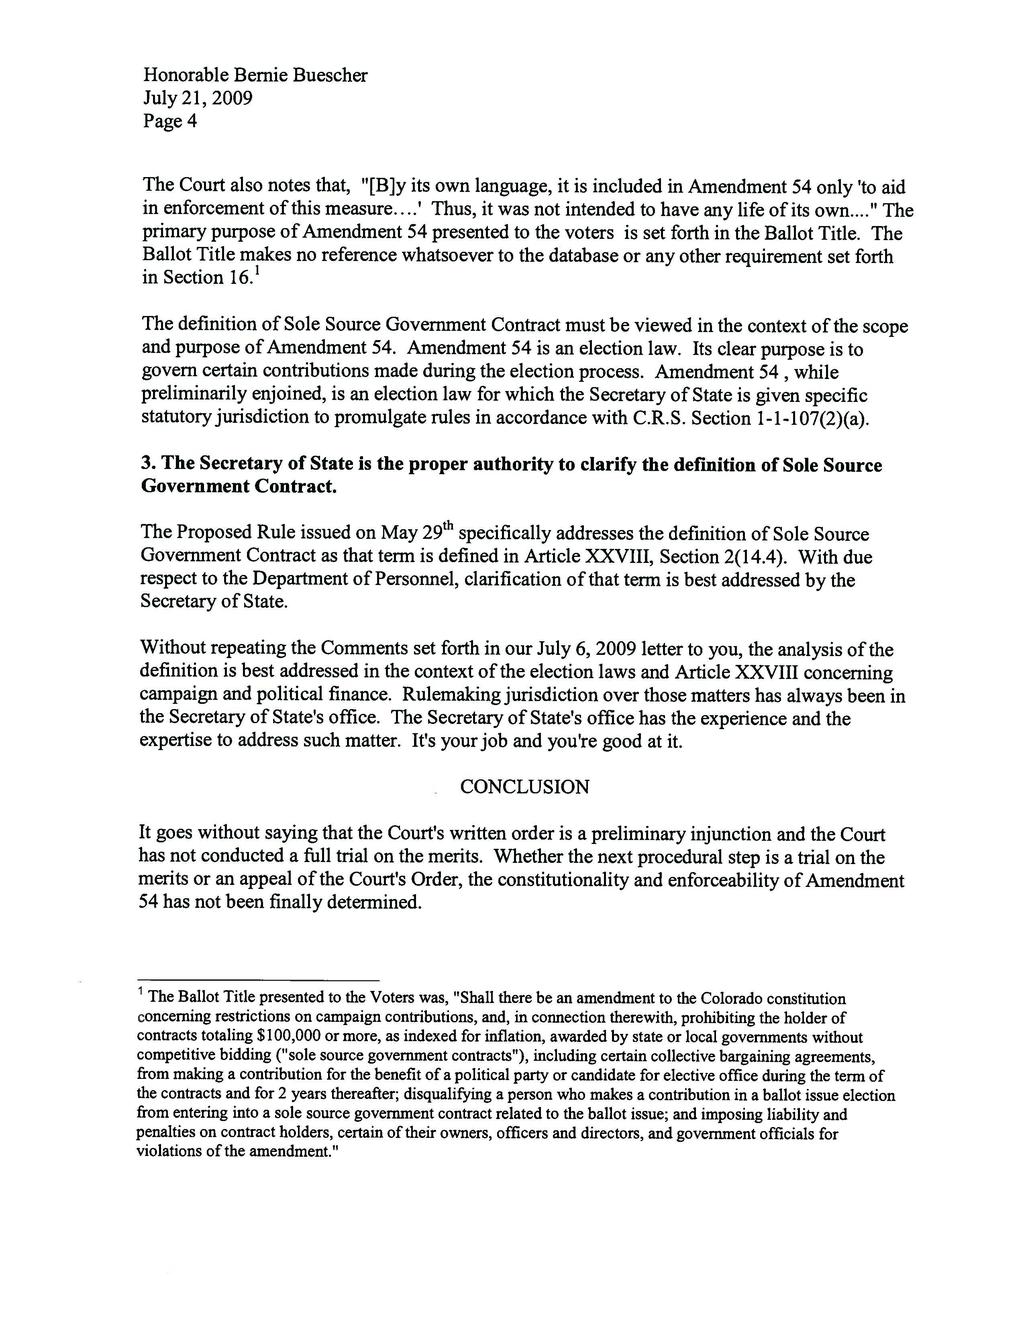 Page 4 The Court also notes that, "[B]y its own language, it is included in Amendment 54 only 'to aid in enforcement of this measure...' Thus, it was not intended to have any life of its own.